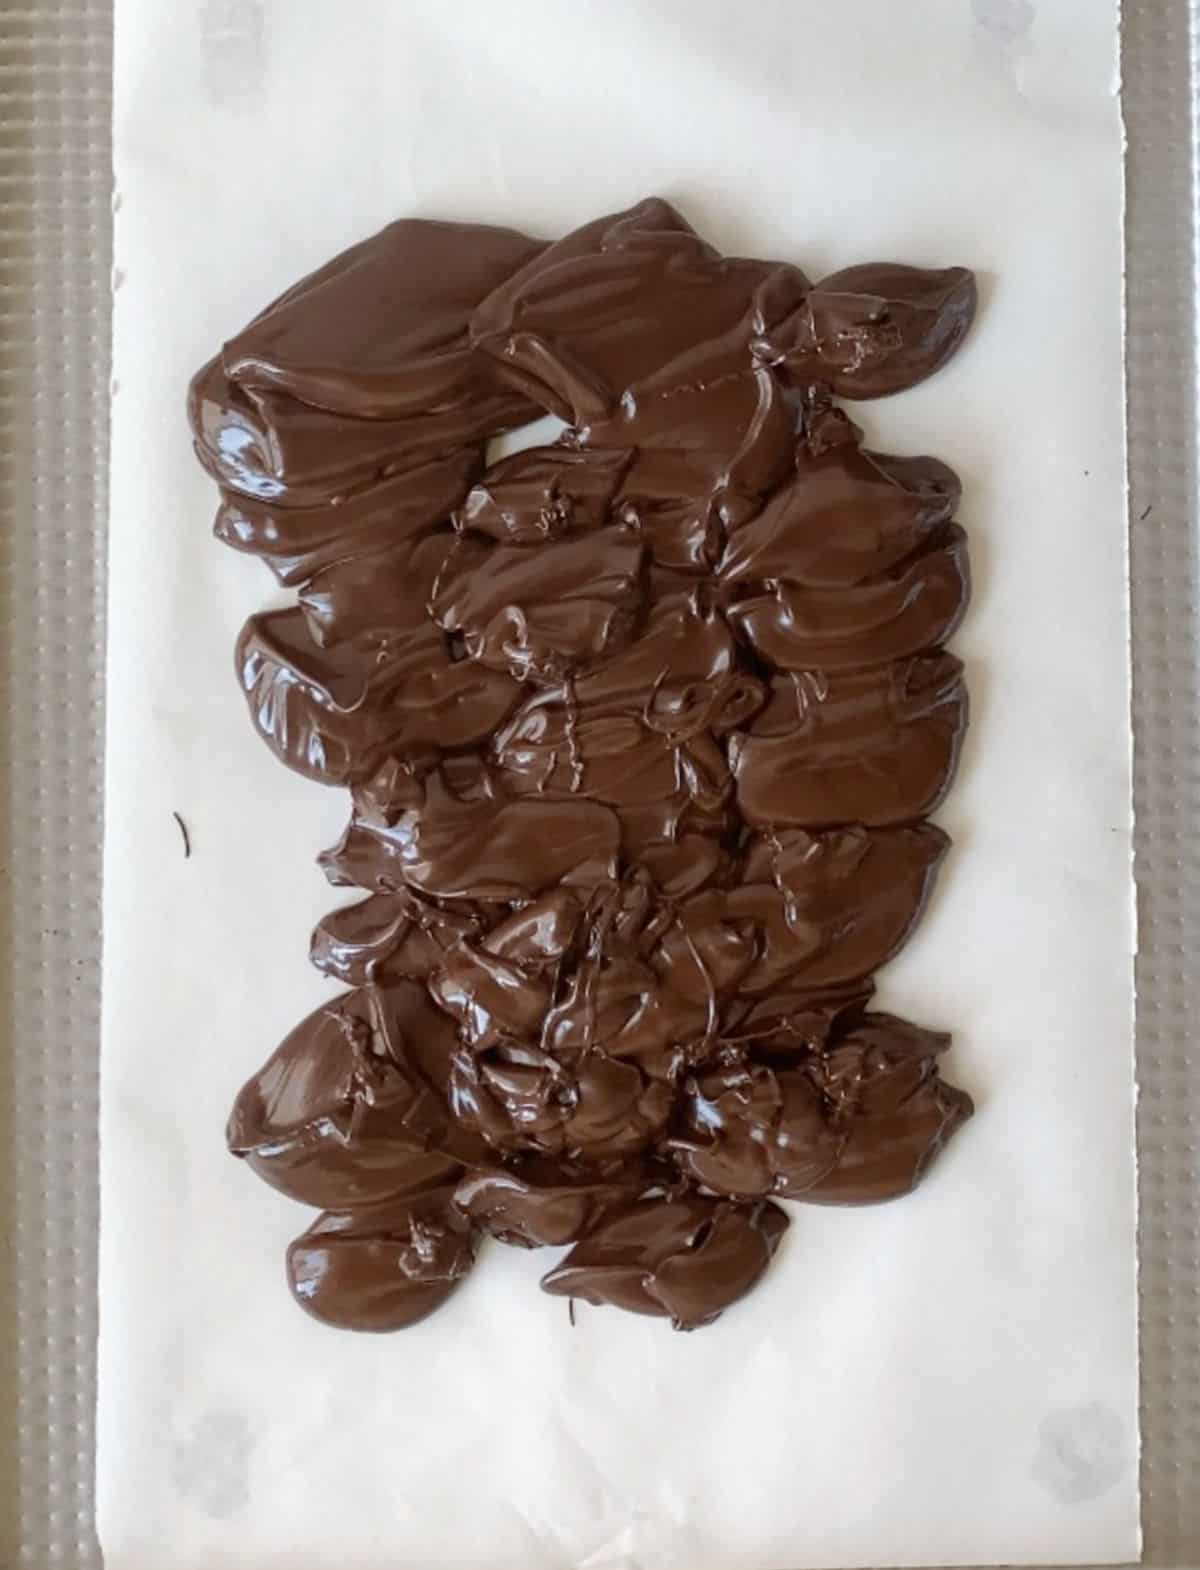 Melted dark chocolate in the middle of a piece of white parchment paper.